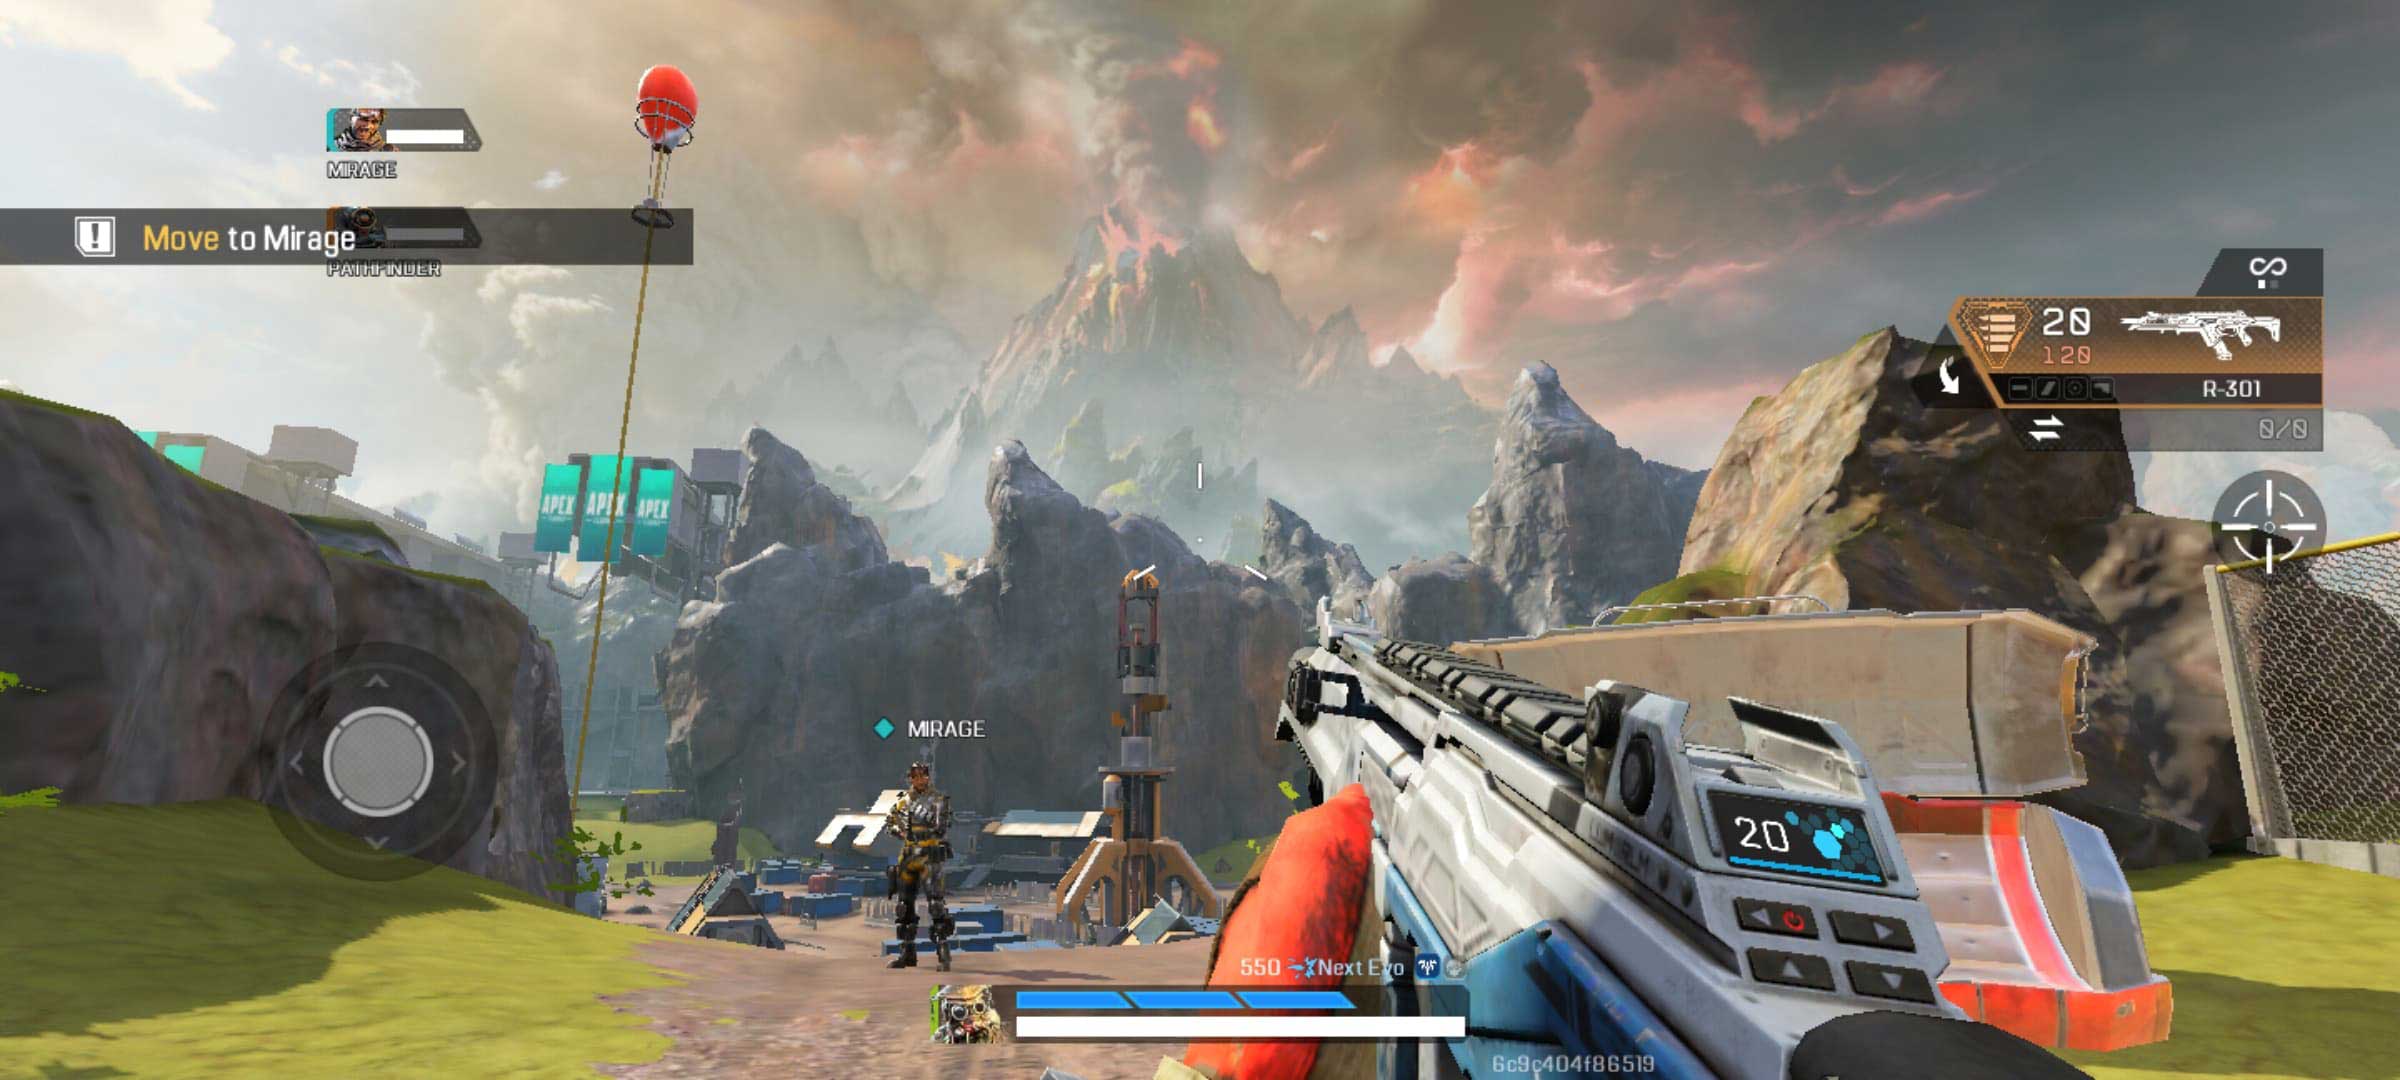 Apex Legends Mobile Is Great For On The Go Gaming